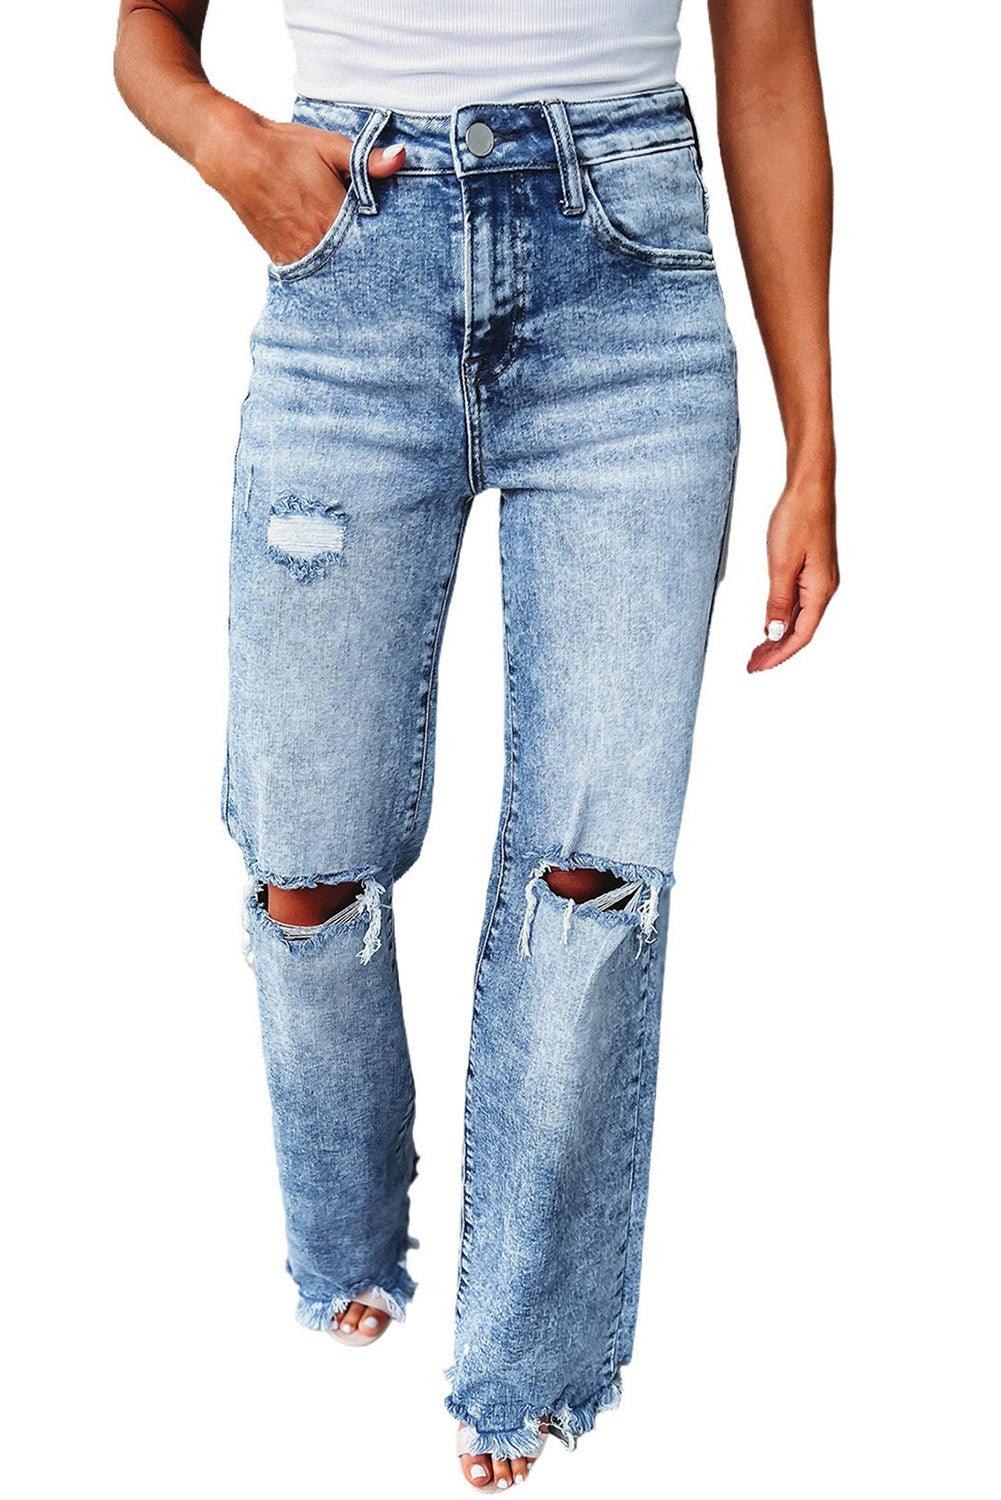 Washed Ripped Wide Leg High Waist Jeans - L & M Kee, LLC